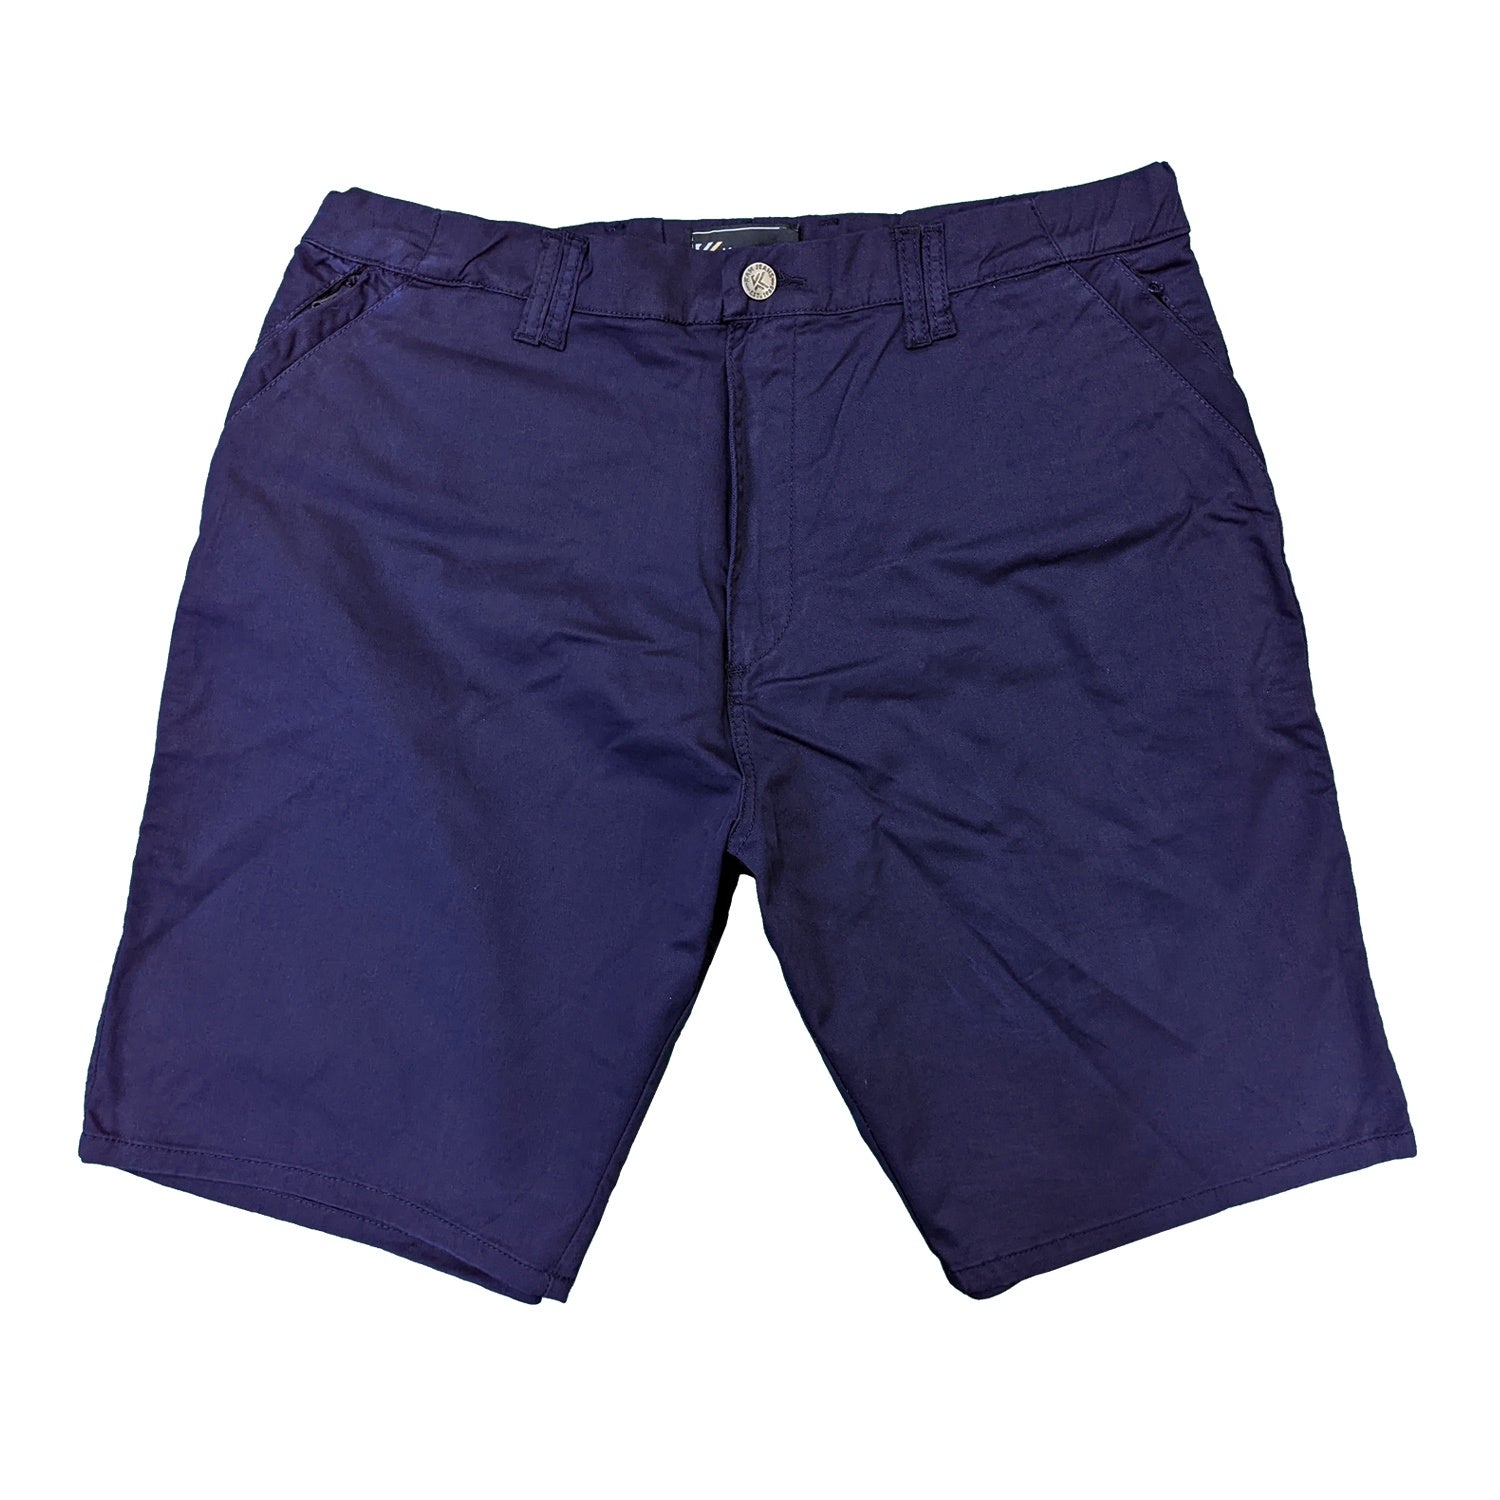 Kam Stretch Rugby Shorts - KBS 3400 - Navy 1